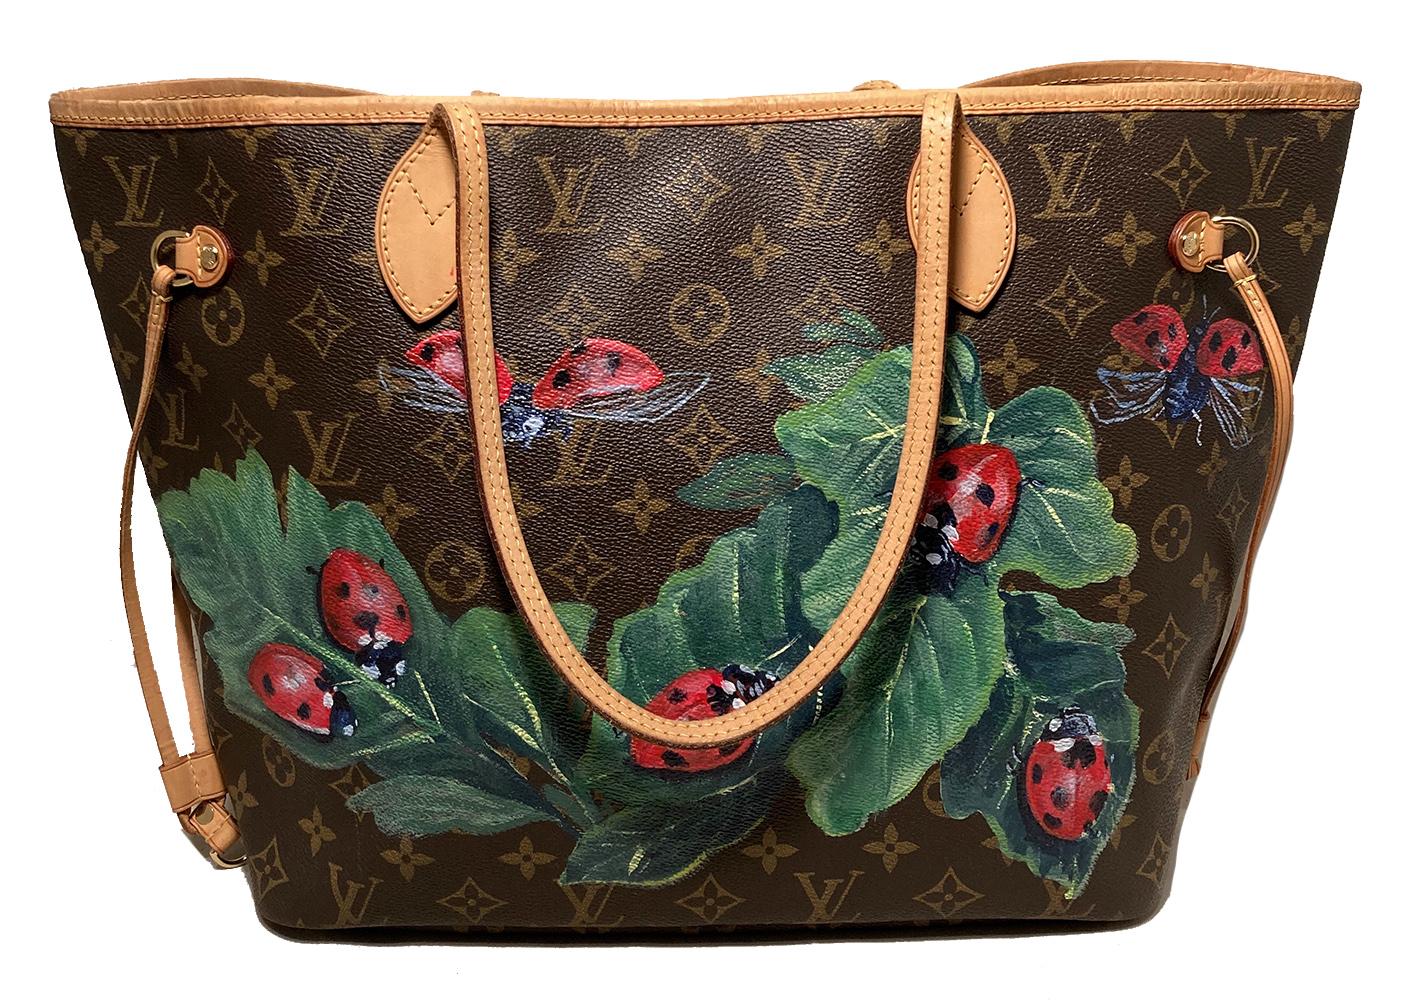 Louis Vuitton Hand Painted Ladybug Neverfull MM Tote in very good condition. Signature monogram canvas exterior with red ladybugs upon leaves painted along front and backsides. Tan leather trim and brass hardware. Top spring ring closure opens to a